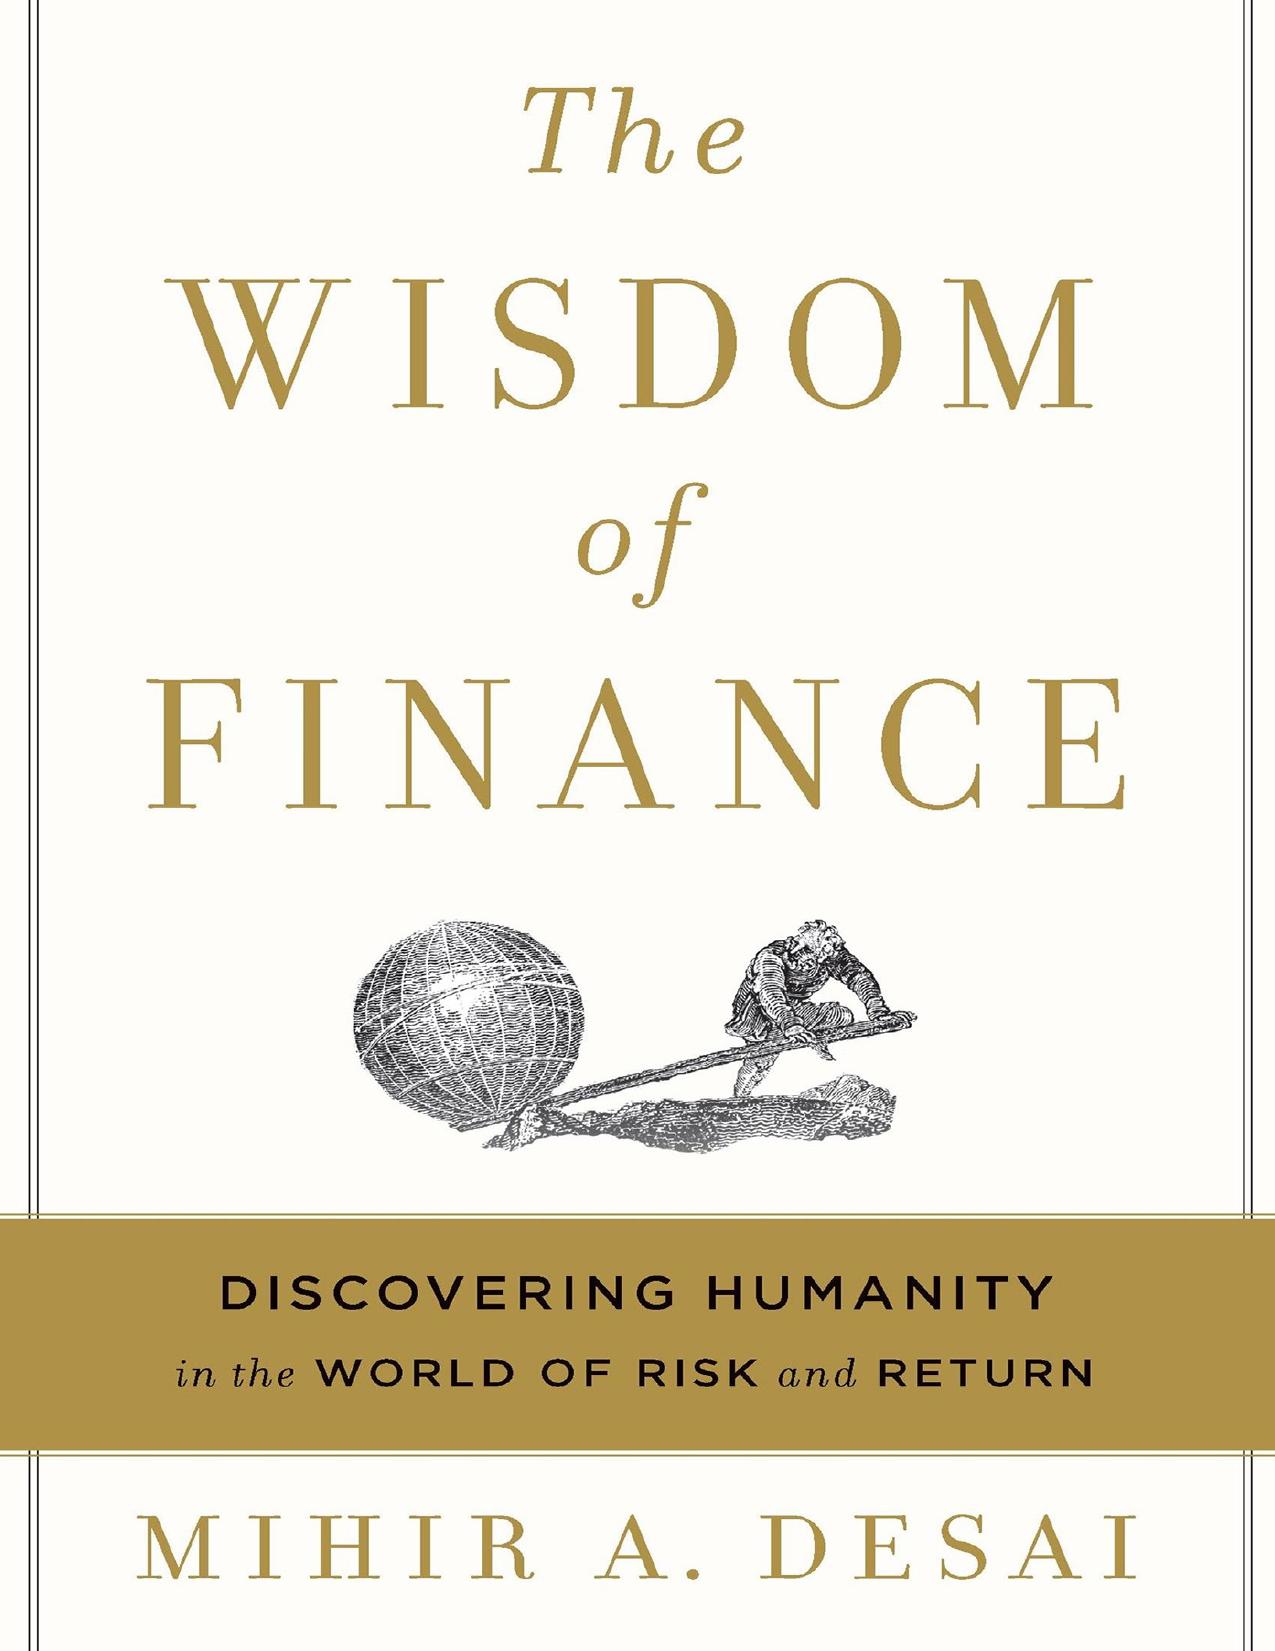 The Wisdom of Finance: Discovering Humanity in the World of Risk and Return - PDFDrive.com